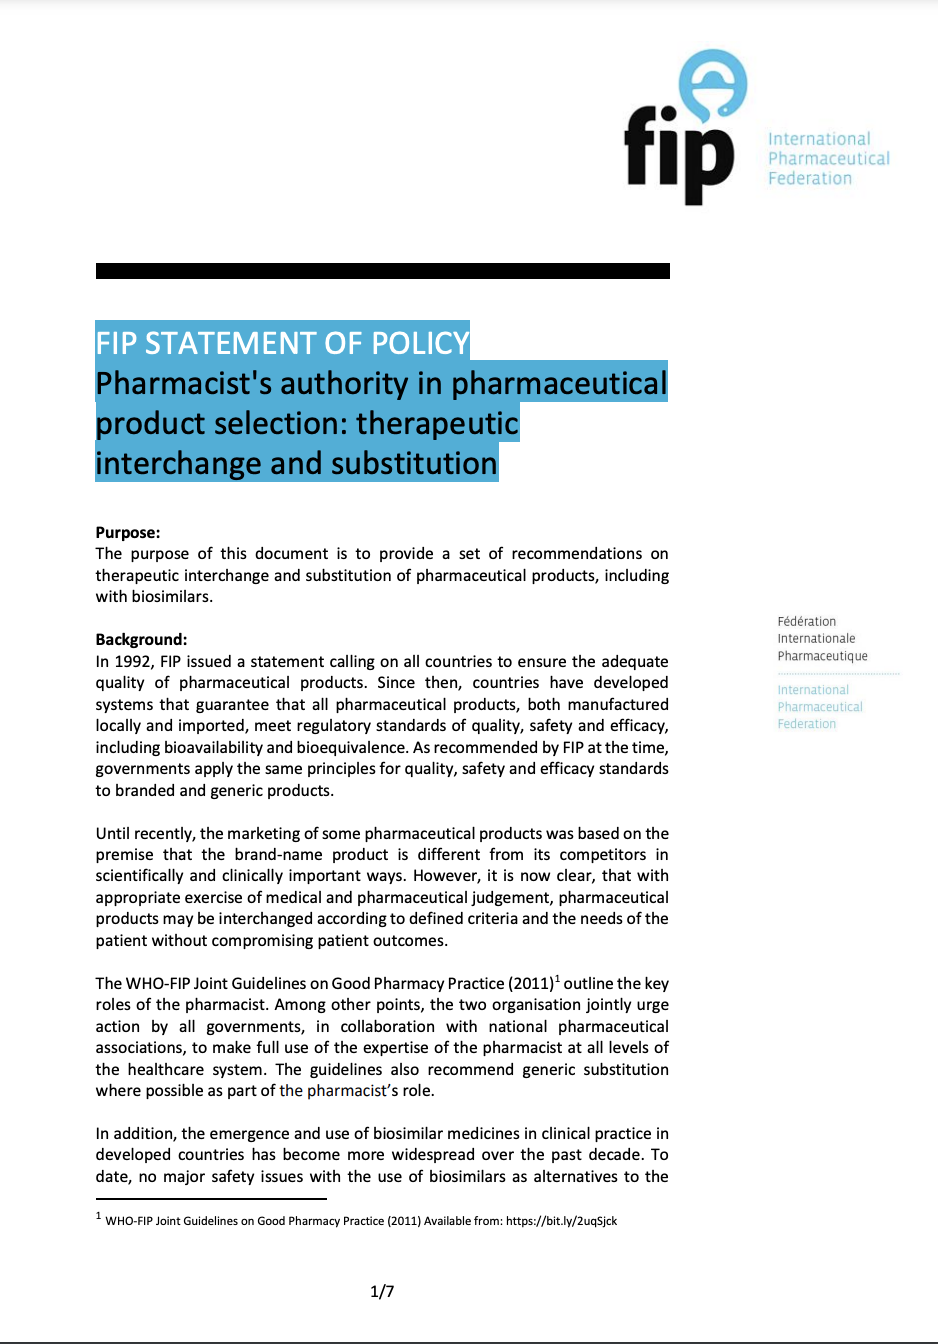 FIP Statement of Policy: Pharmacist's authority in pharmaceutical product selection: therapeutic interchange and substitution (2018) Thumbnail